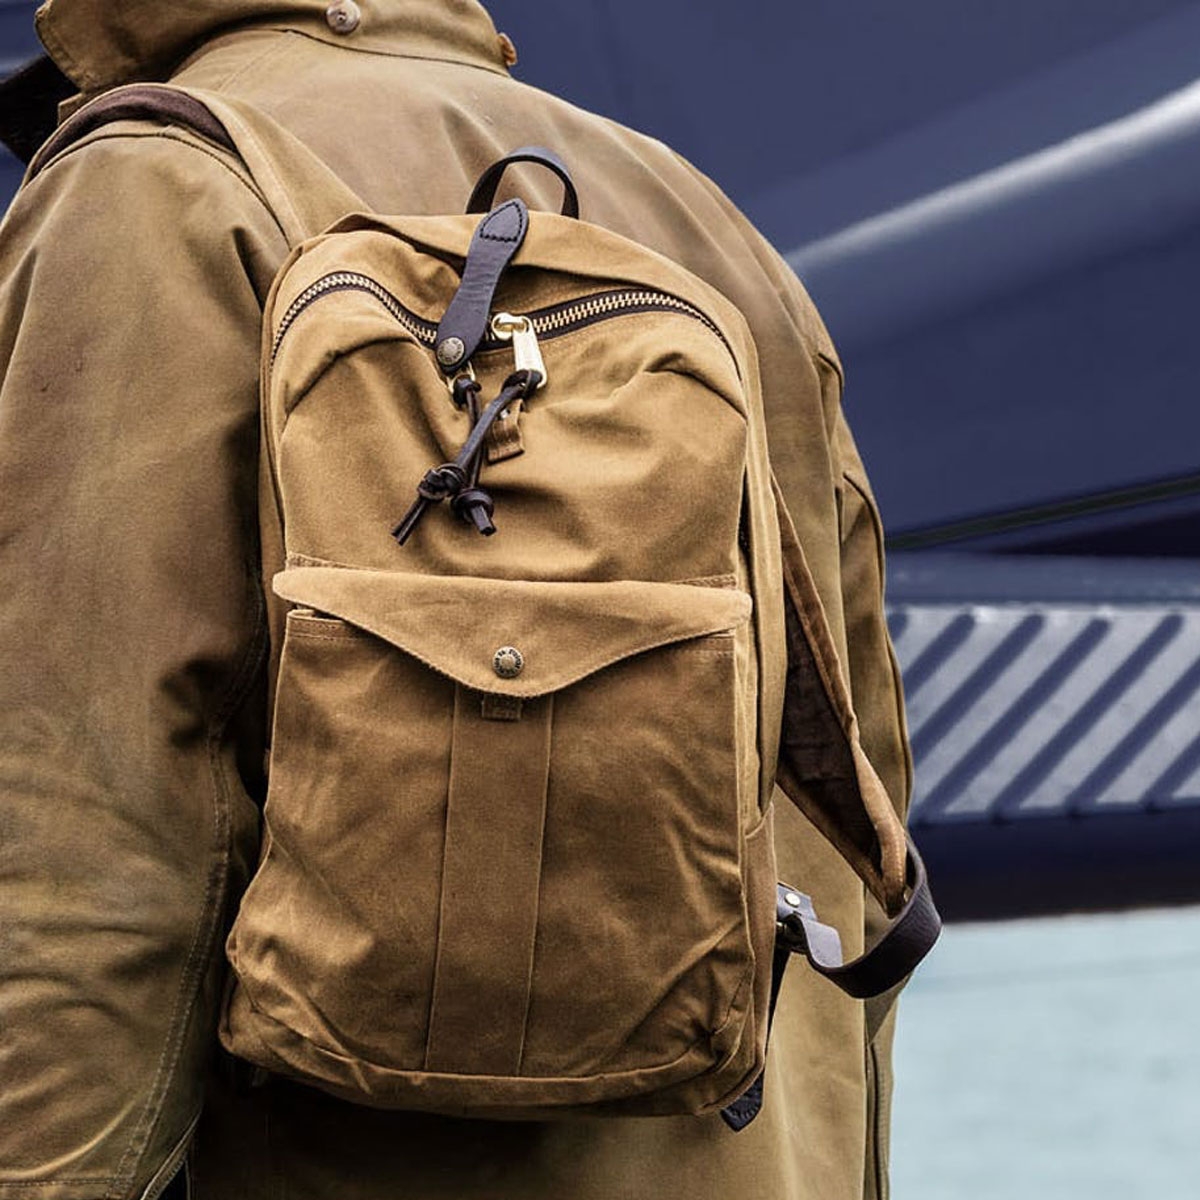 Filson Journeyman Backpack 20231638 Tan, waterproof backpack that will last through decades of use, in any climate